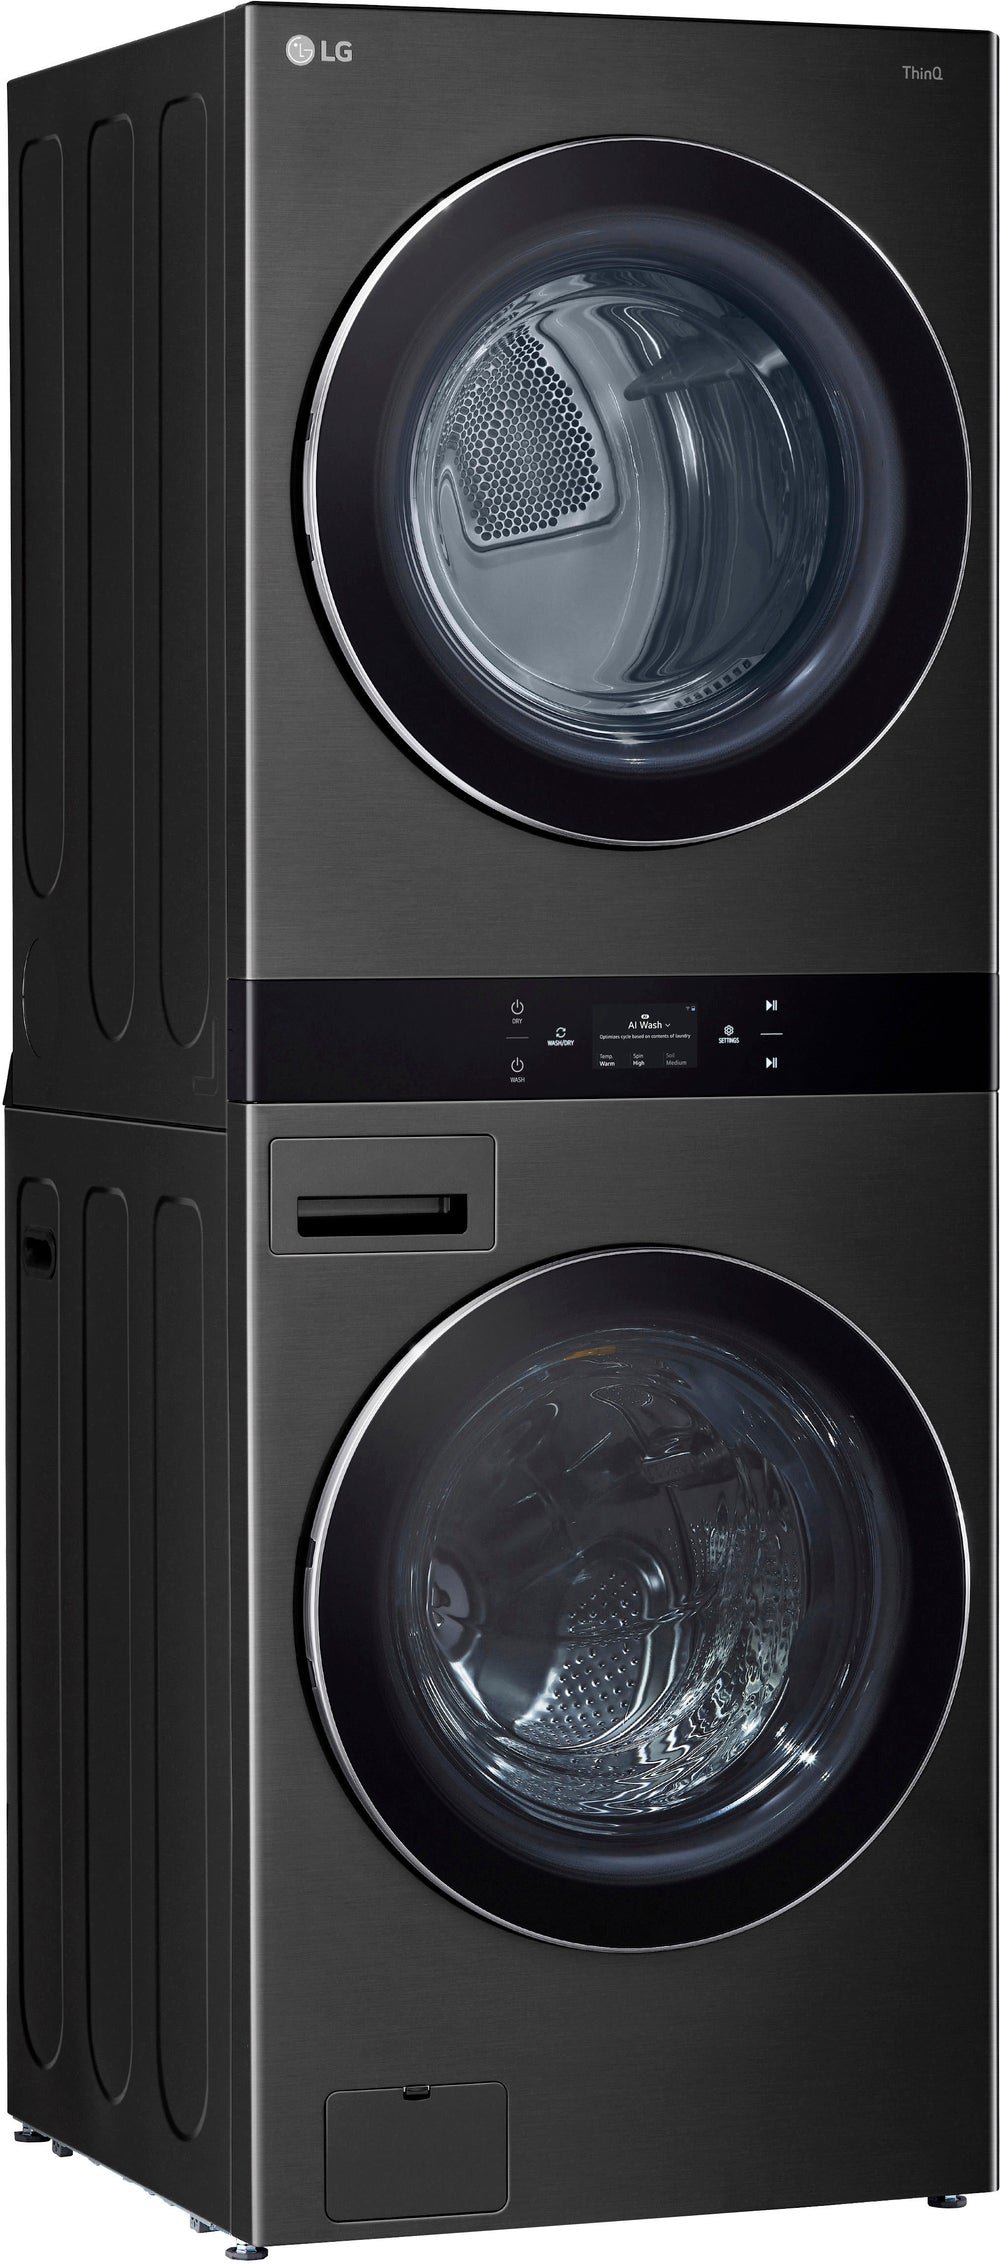 LG - 5.0 Cu. Ft. HE Smart Front Load Washer and 7.4 Cu. Ft. Electric Dryer WashTower with Steam and Center Control - Black Steel_1